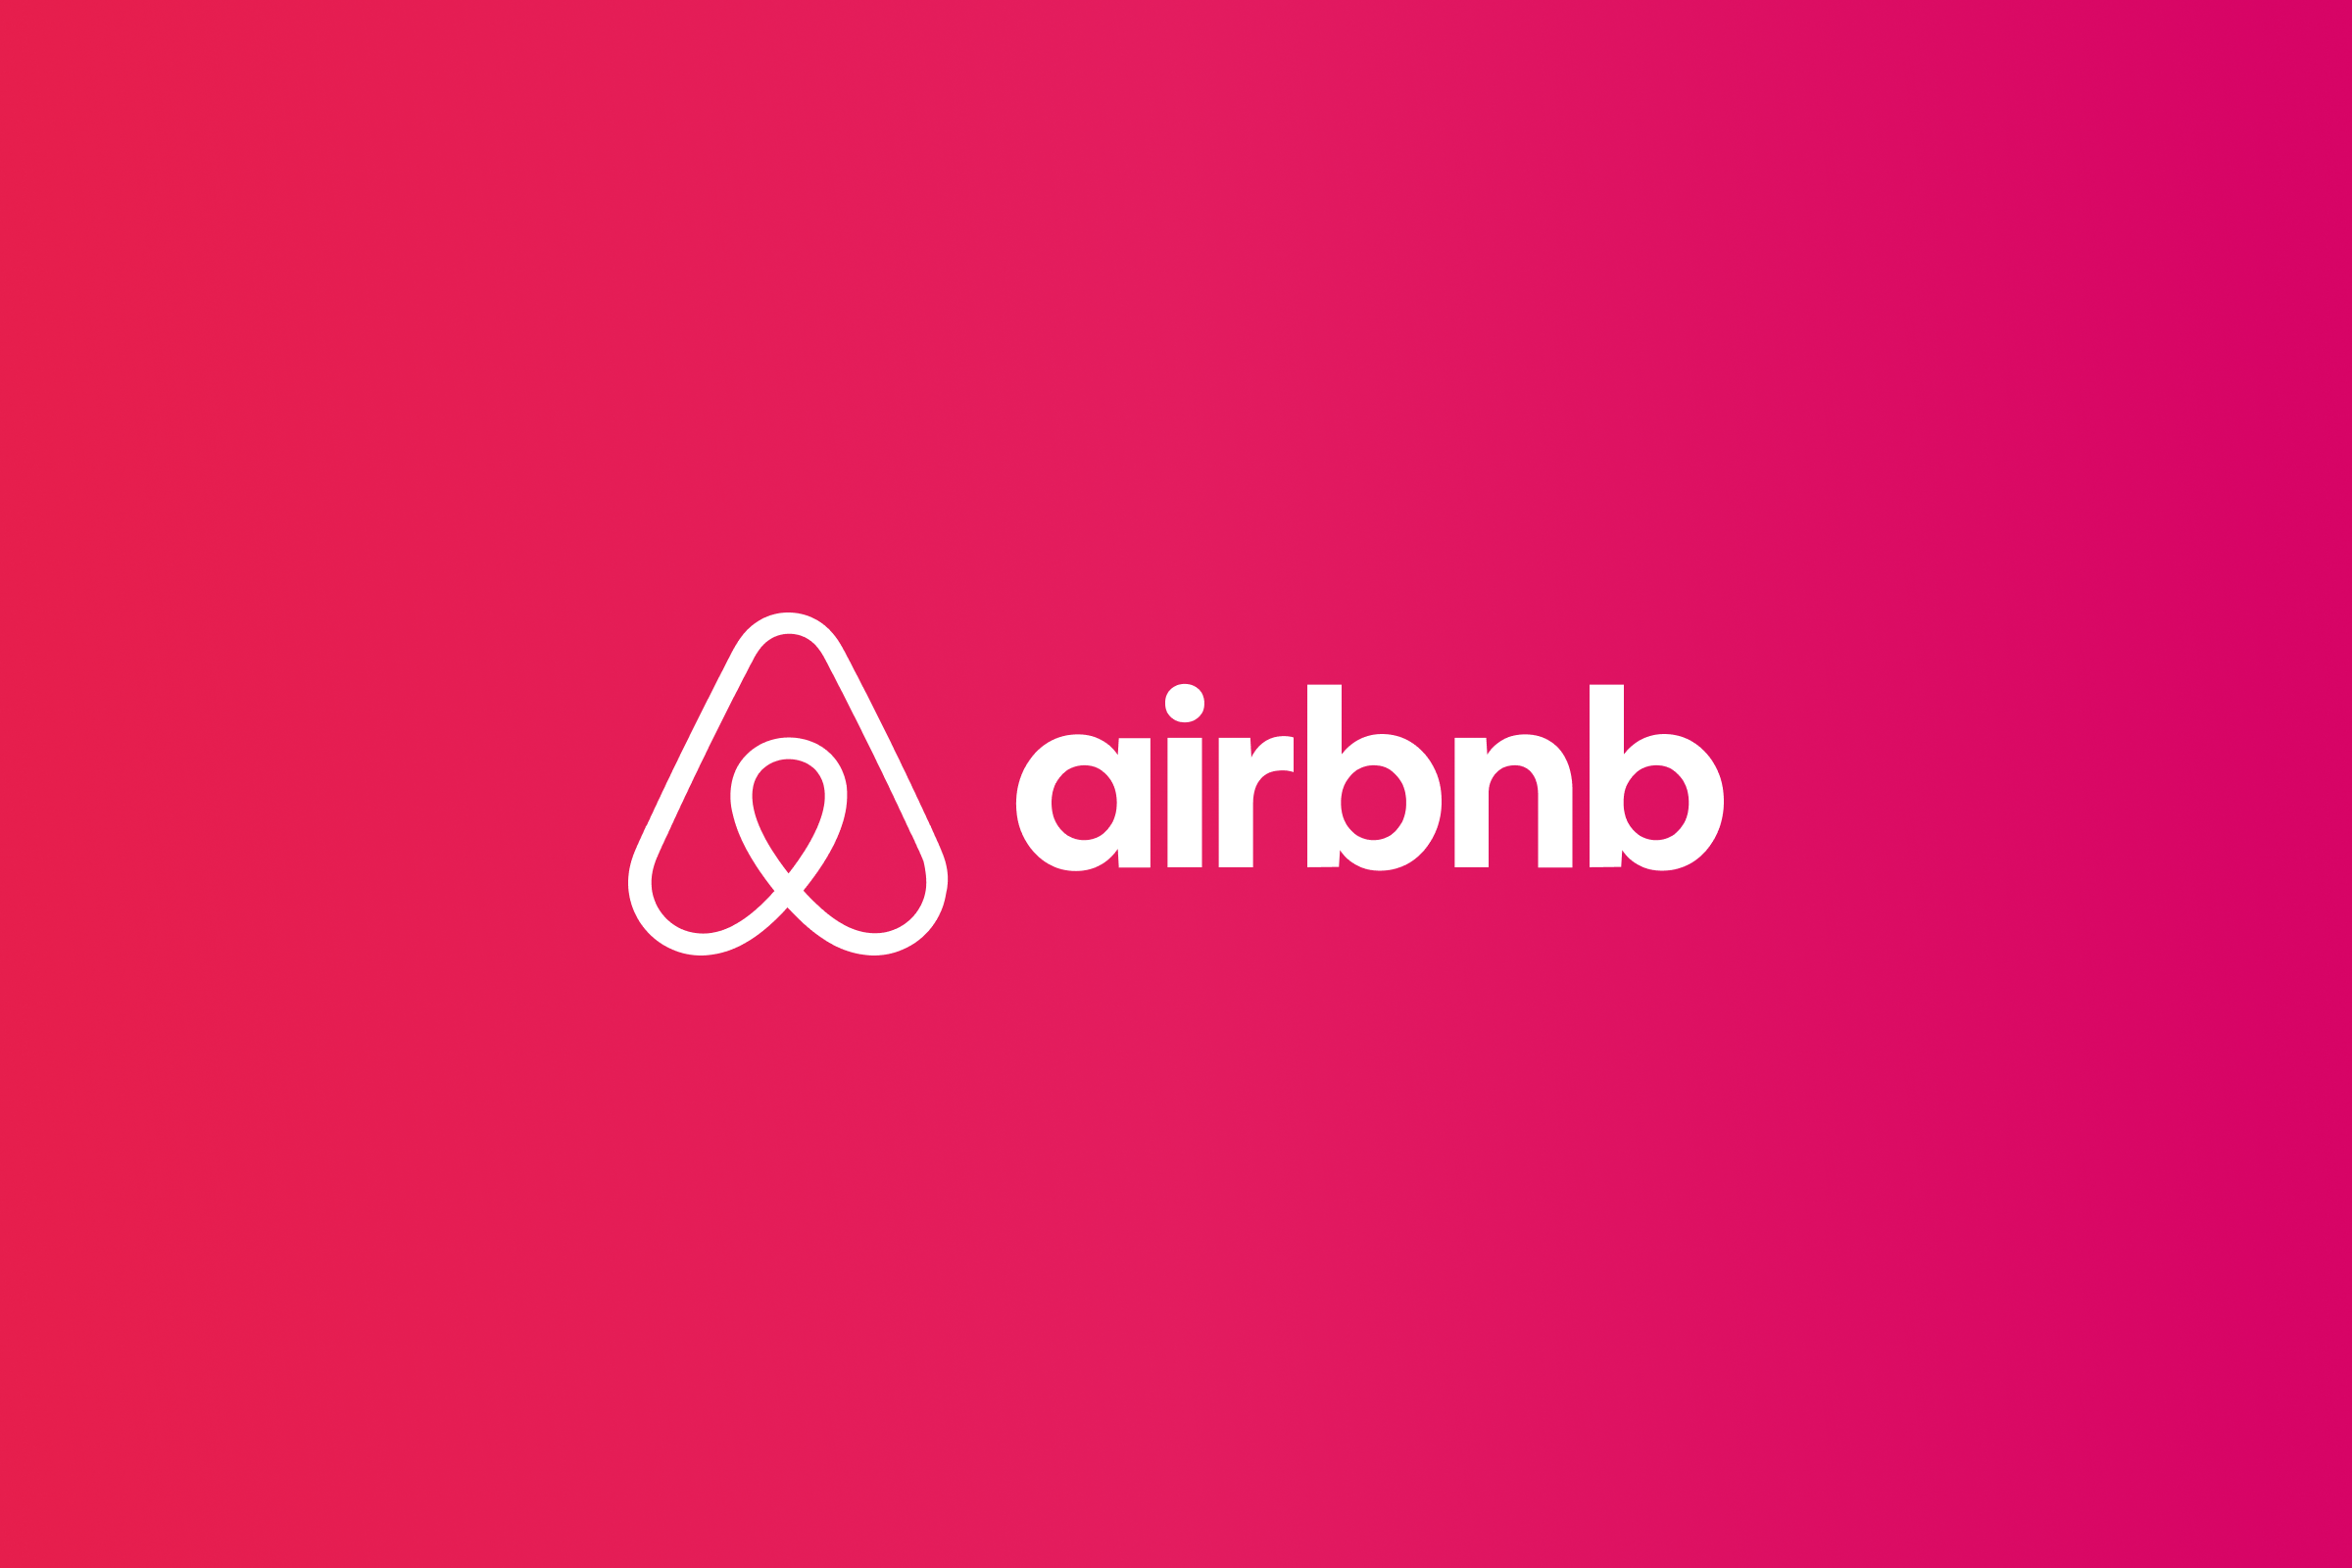 White Airbnb logo and wordmark lockup over a colorful gradient.